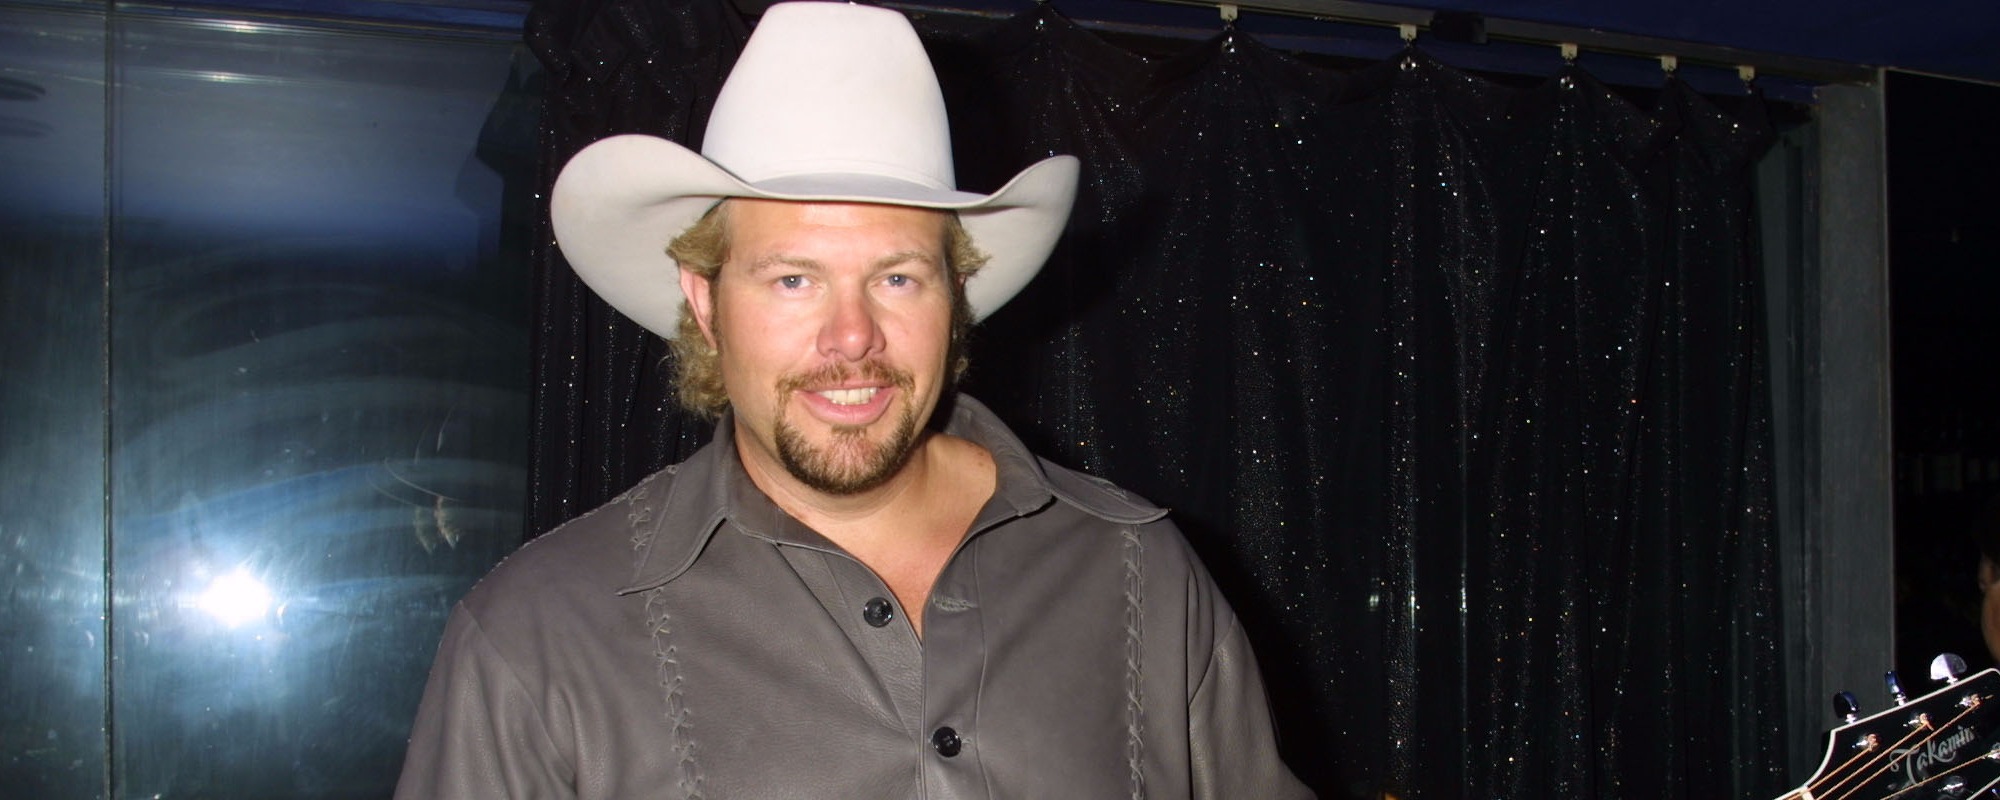 Toby Keith’s Family Issues the Perfect Message to Jason Aldean Over His ACM Awards Tribute Performance